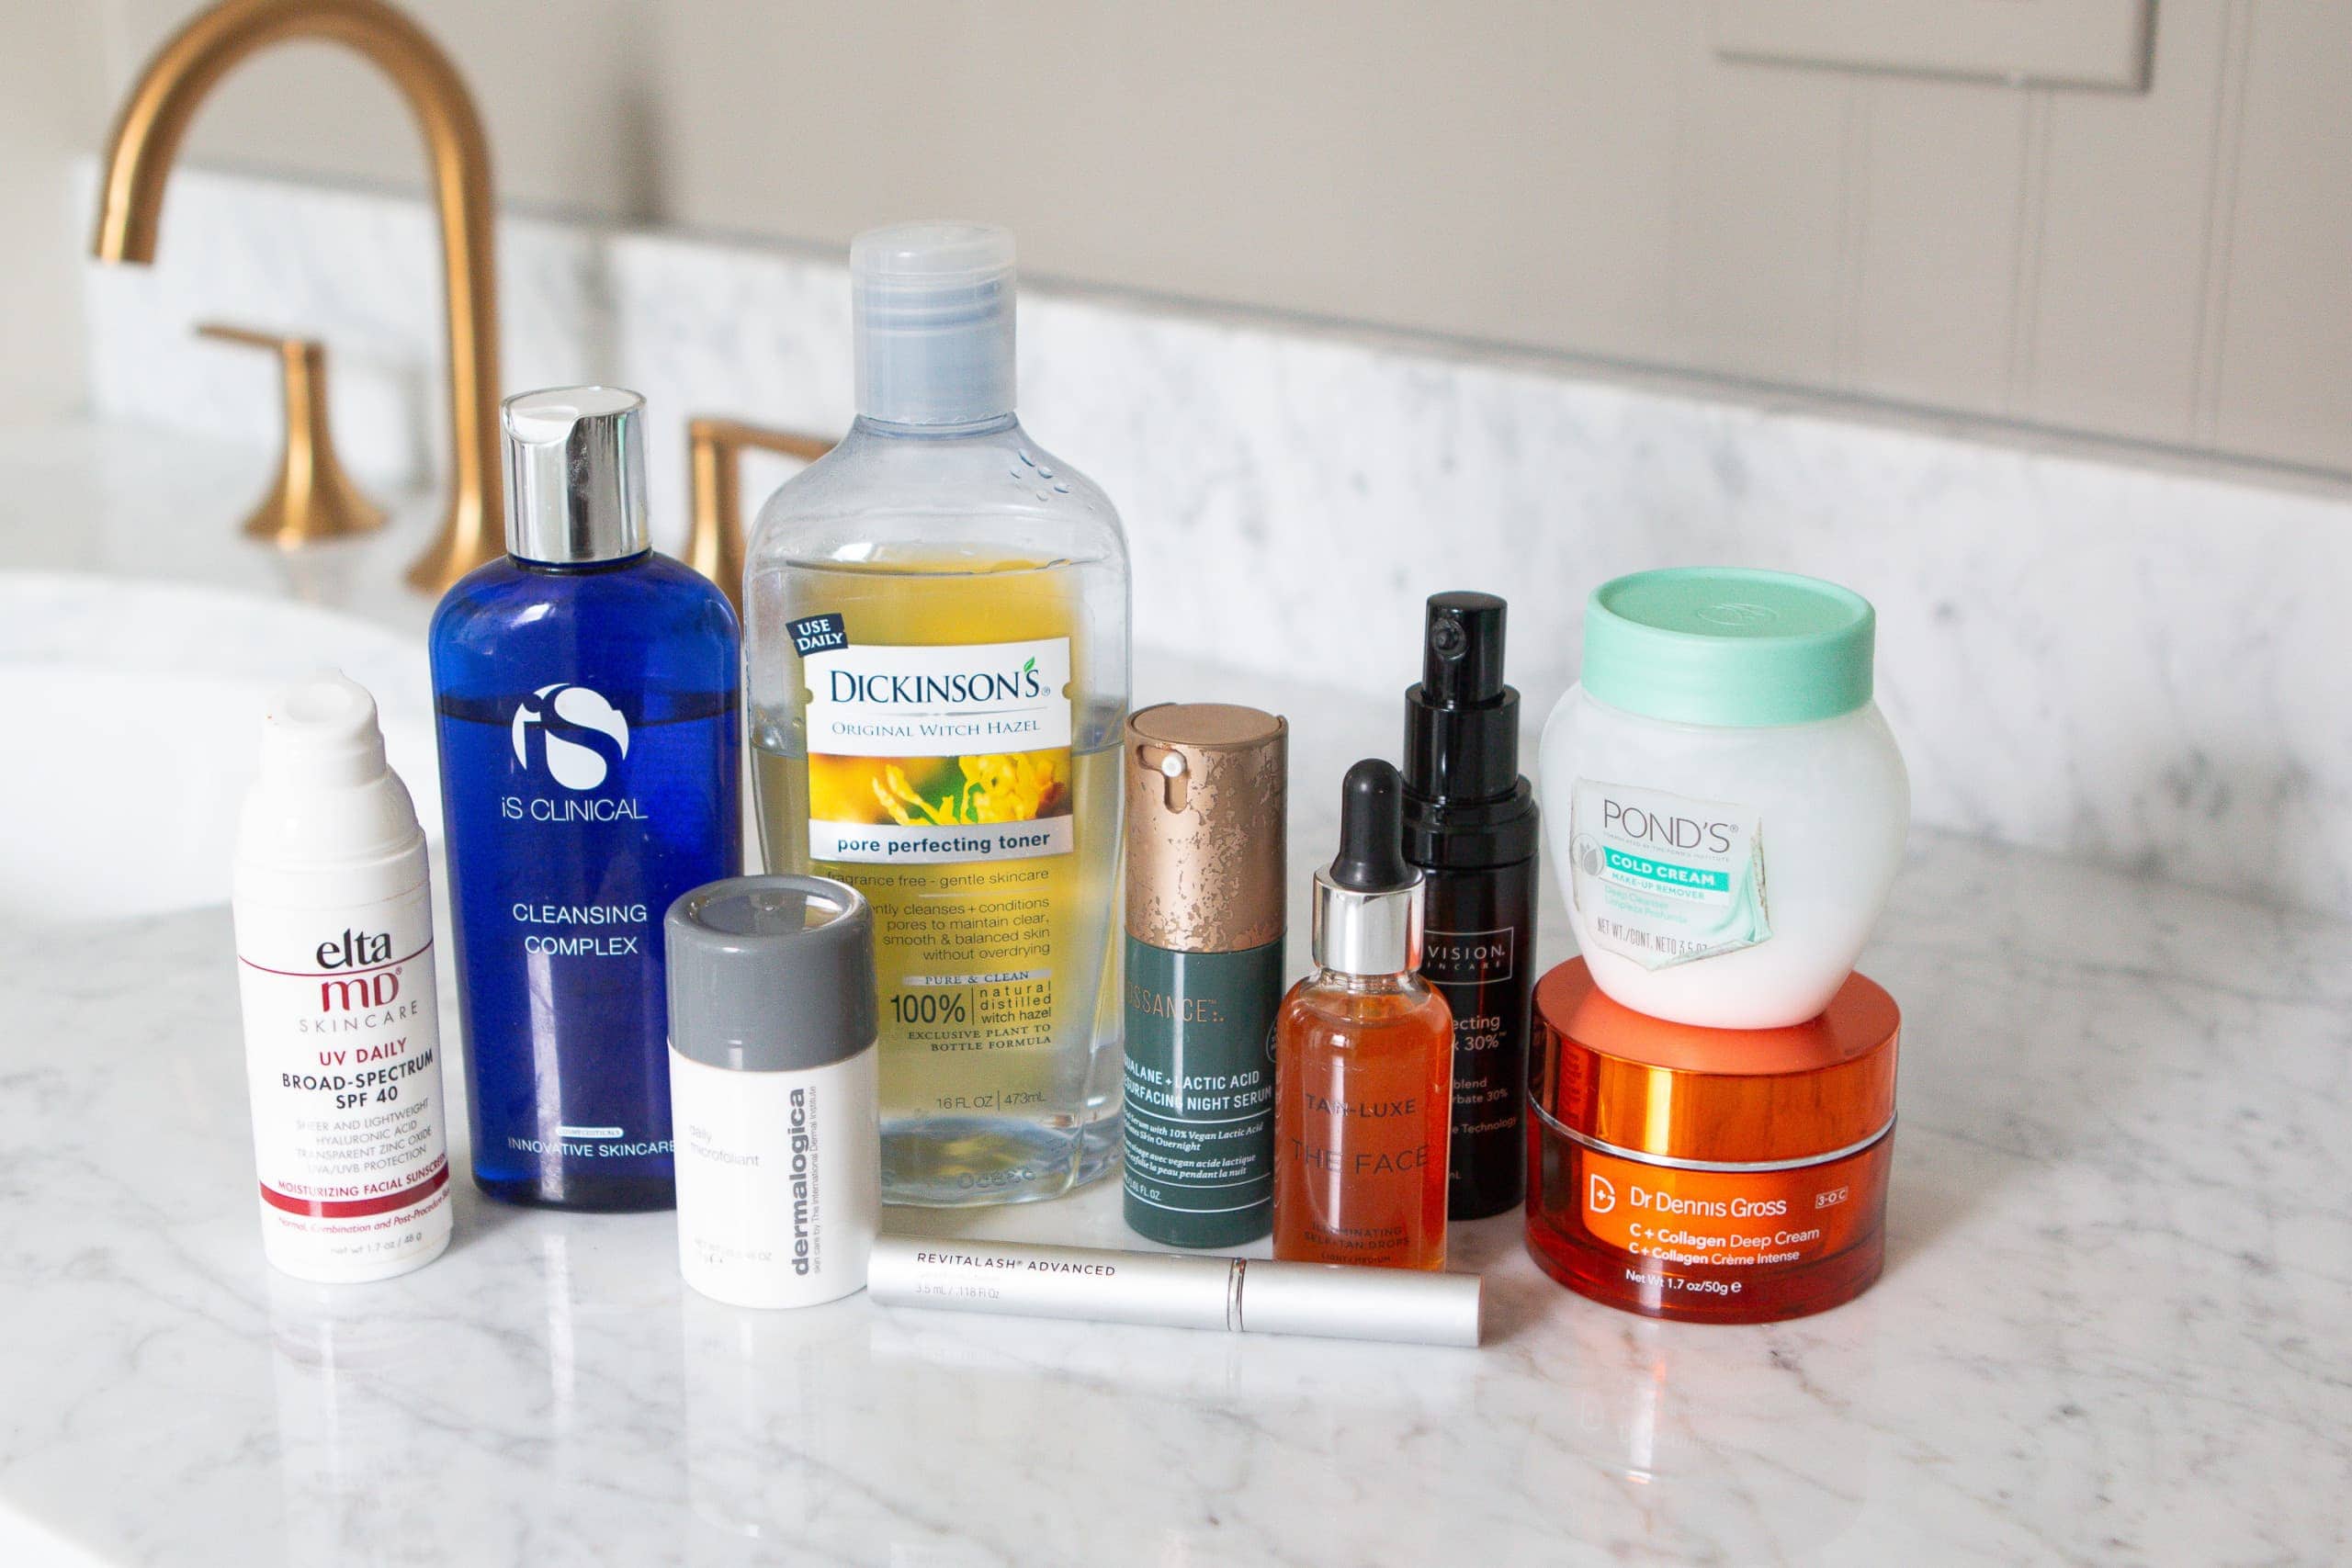 These are some of my skincare favorites for my dry and aging skin